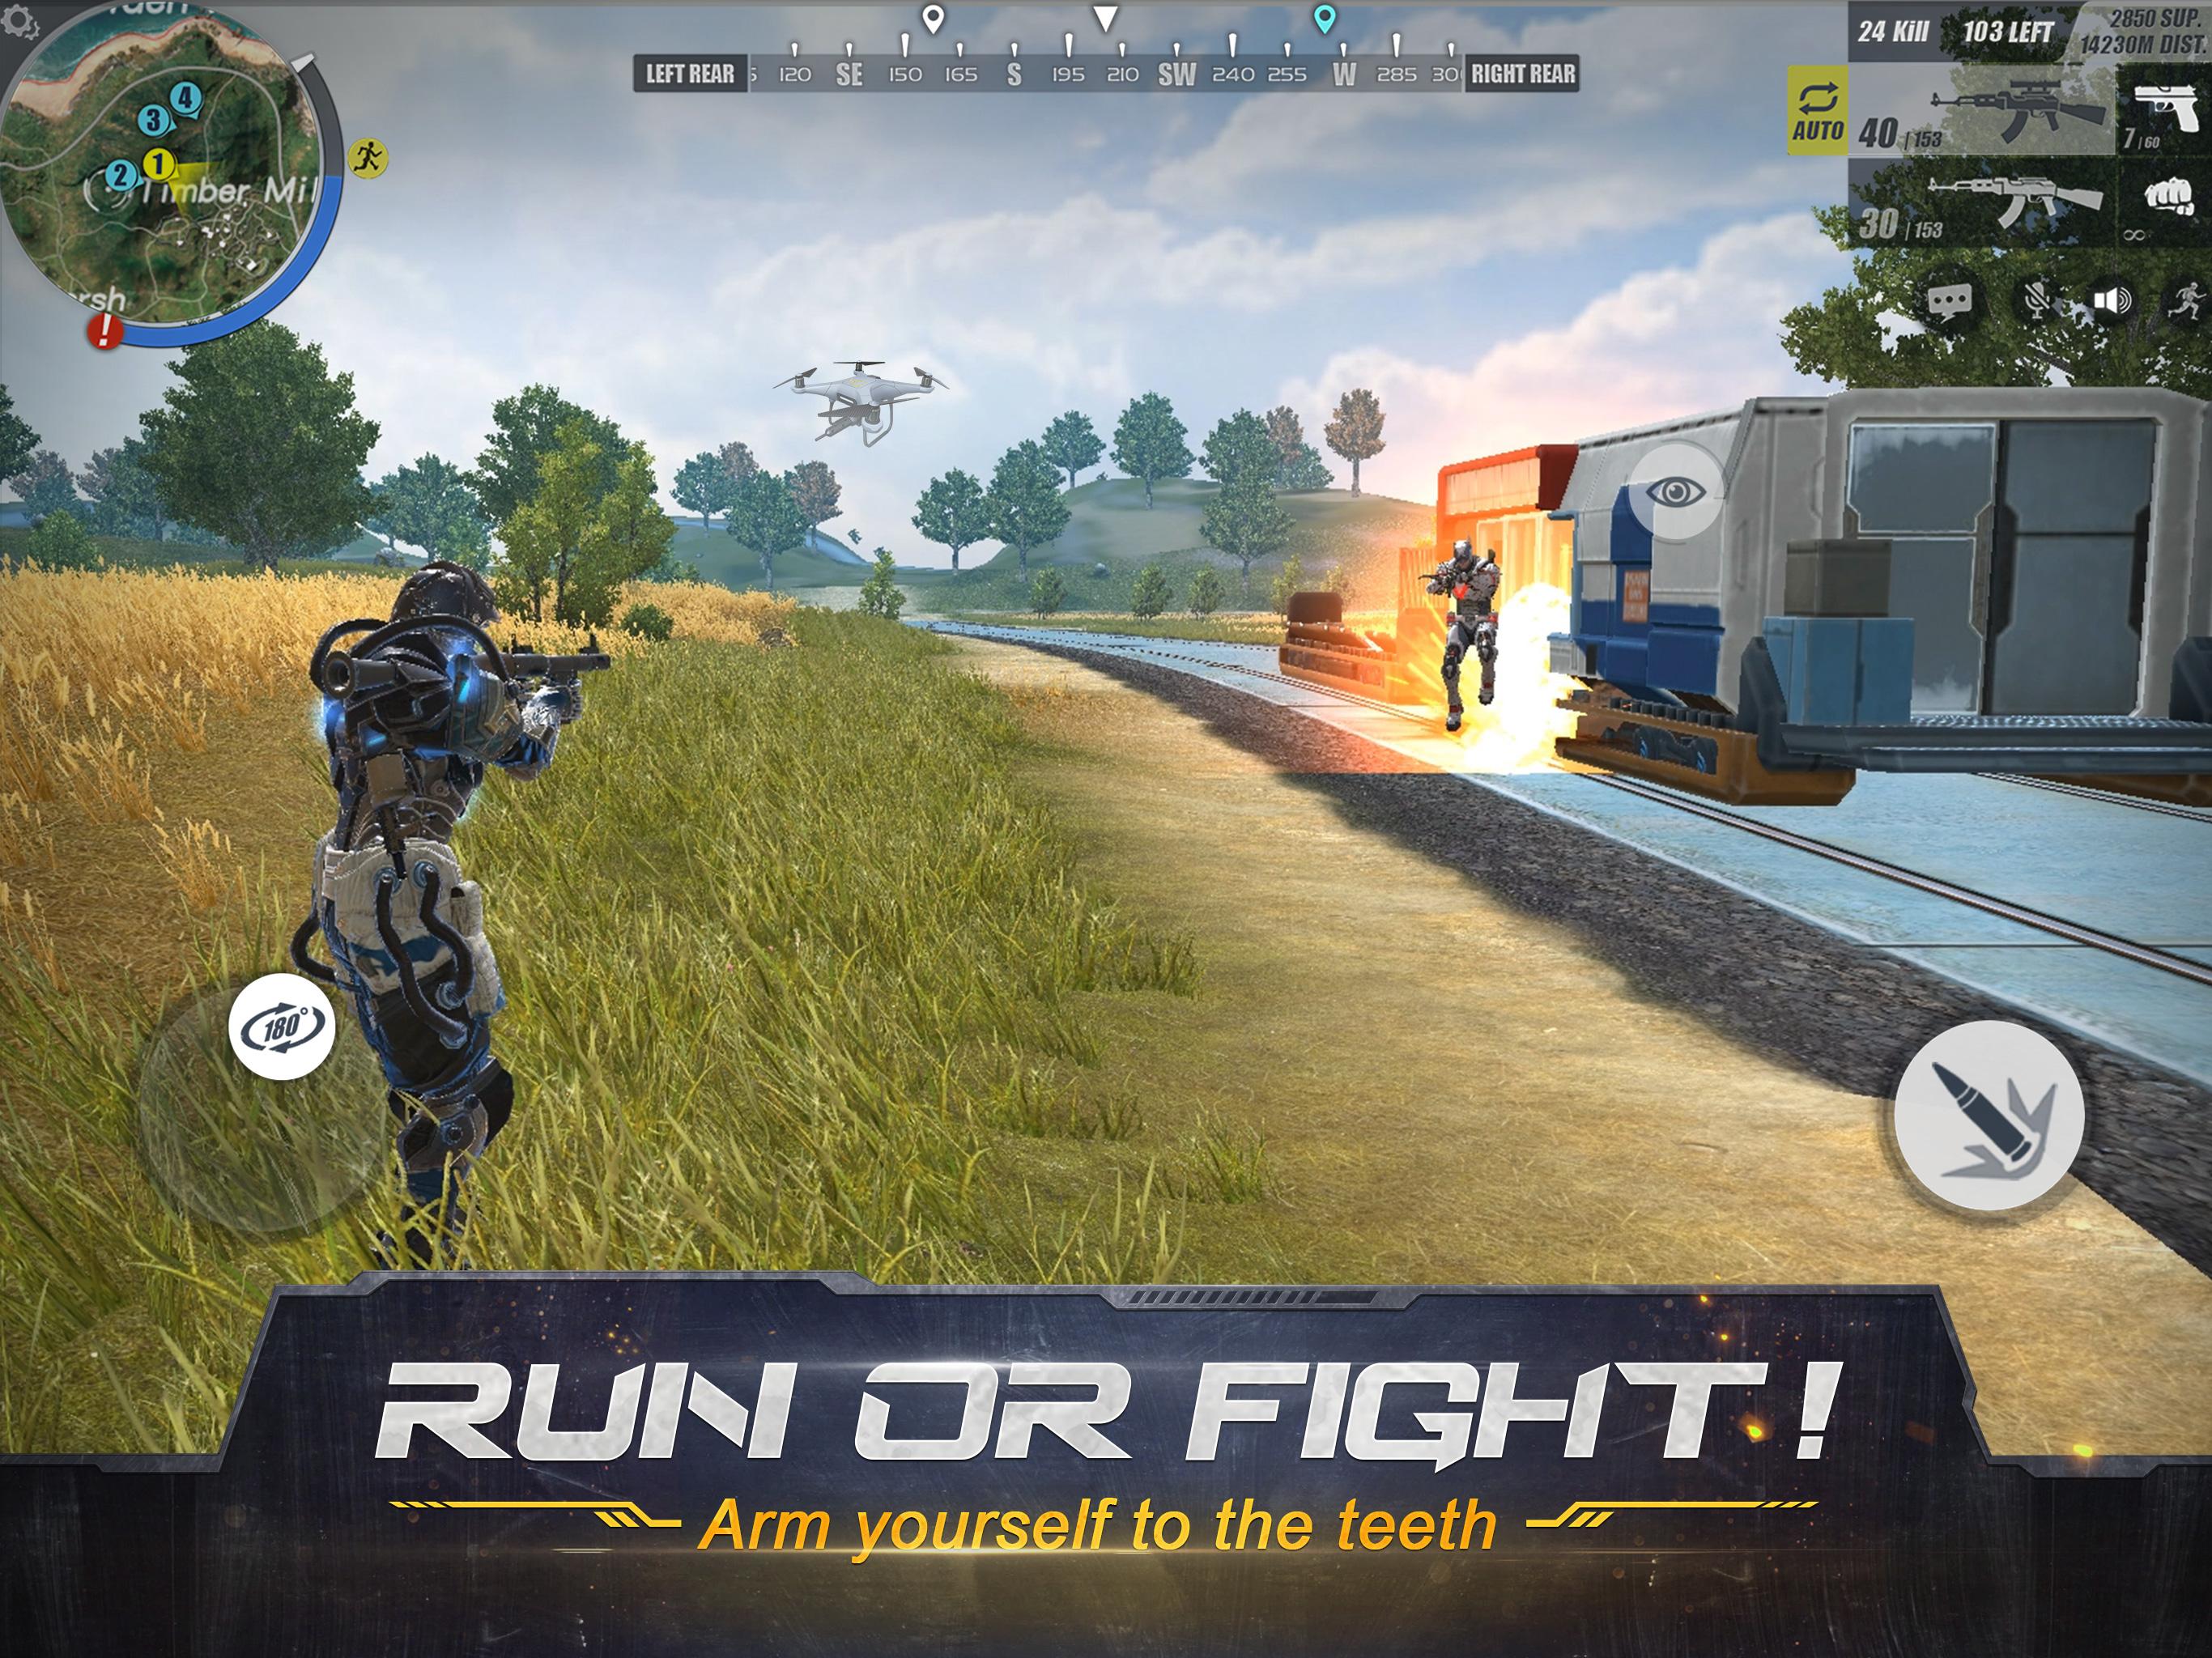 How to Download Rules of Survival on PC (with Pictures) - wikiHow